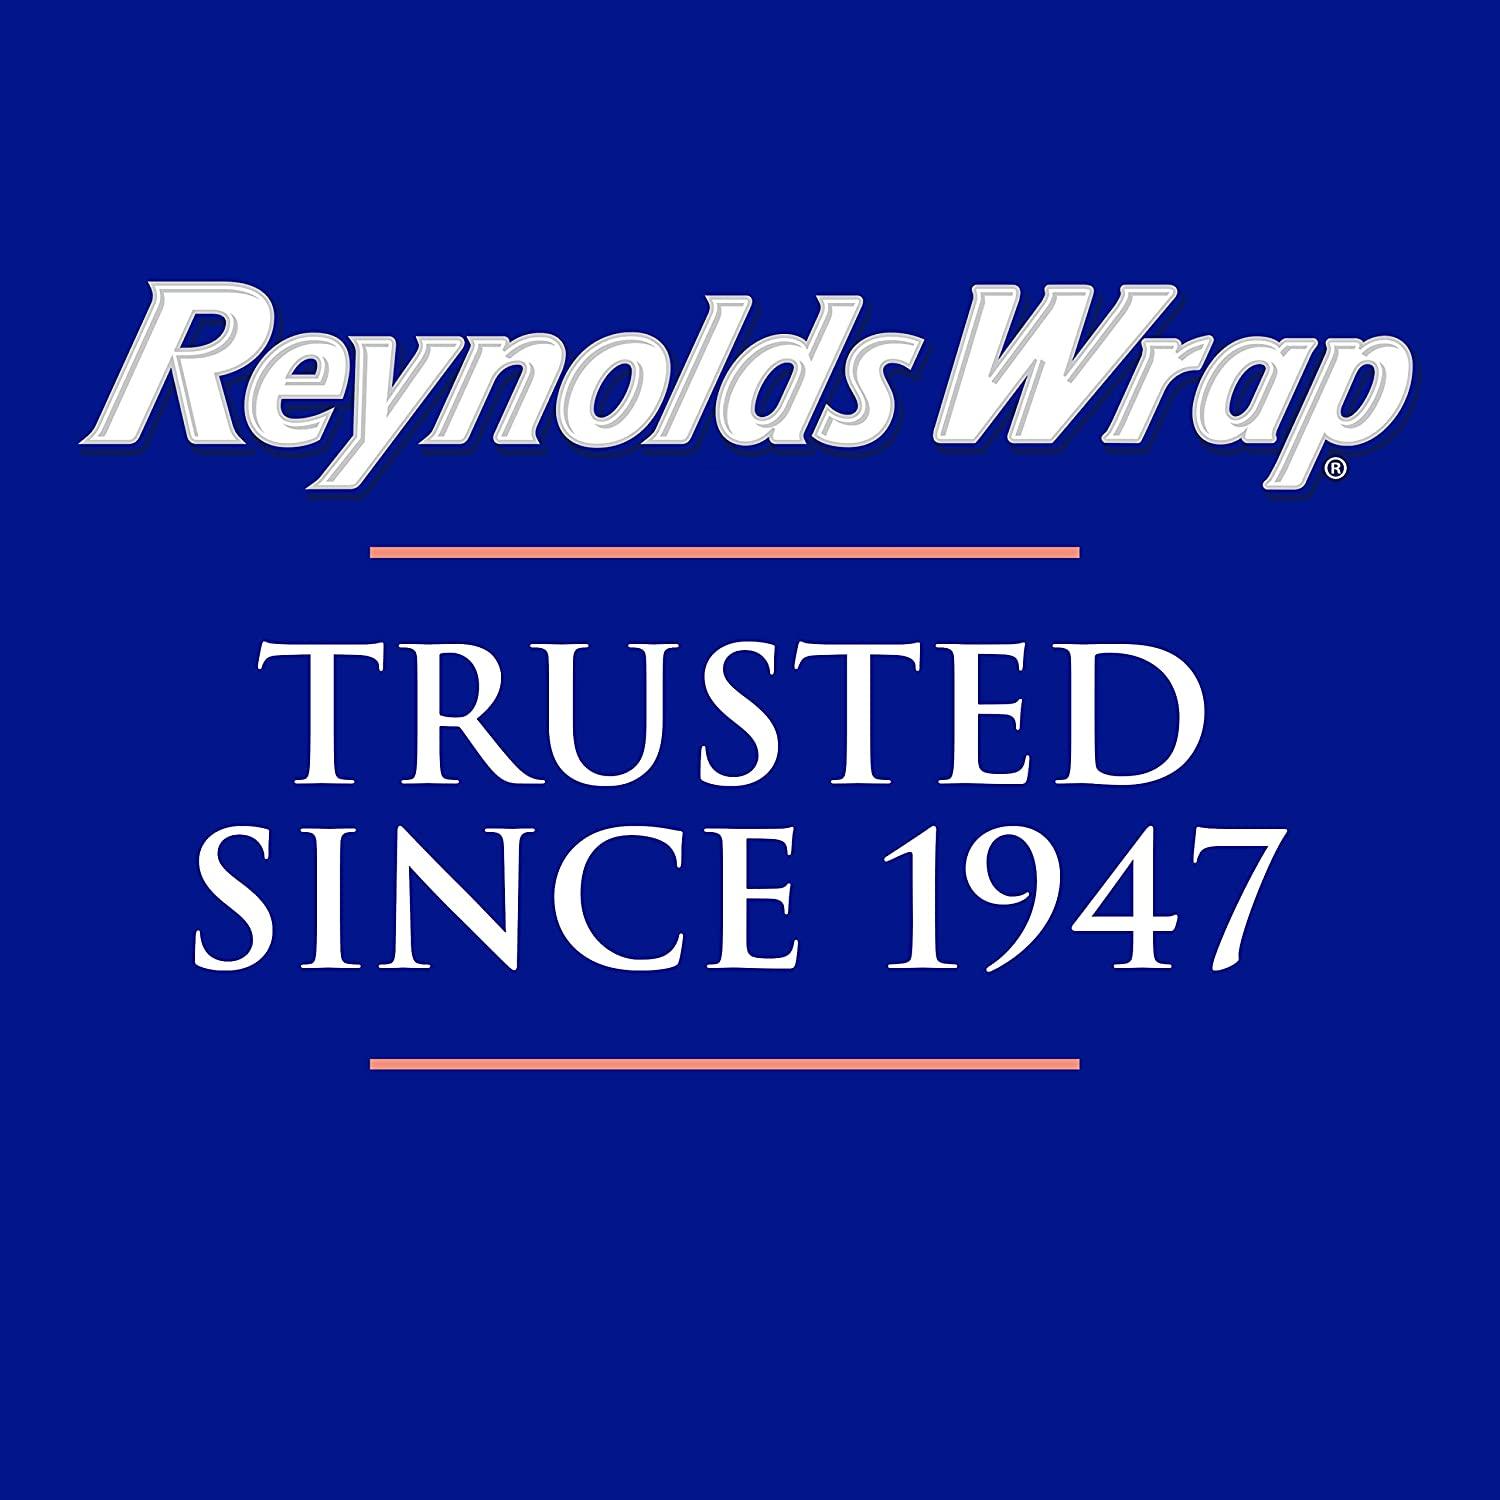  Reynolds Wrappers Pre-Cut Aluminum Foil Sheets, 12x10.75  Inches, 500 Sheets